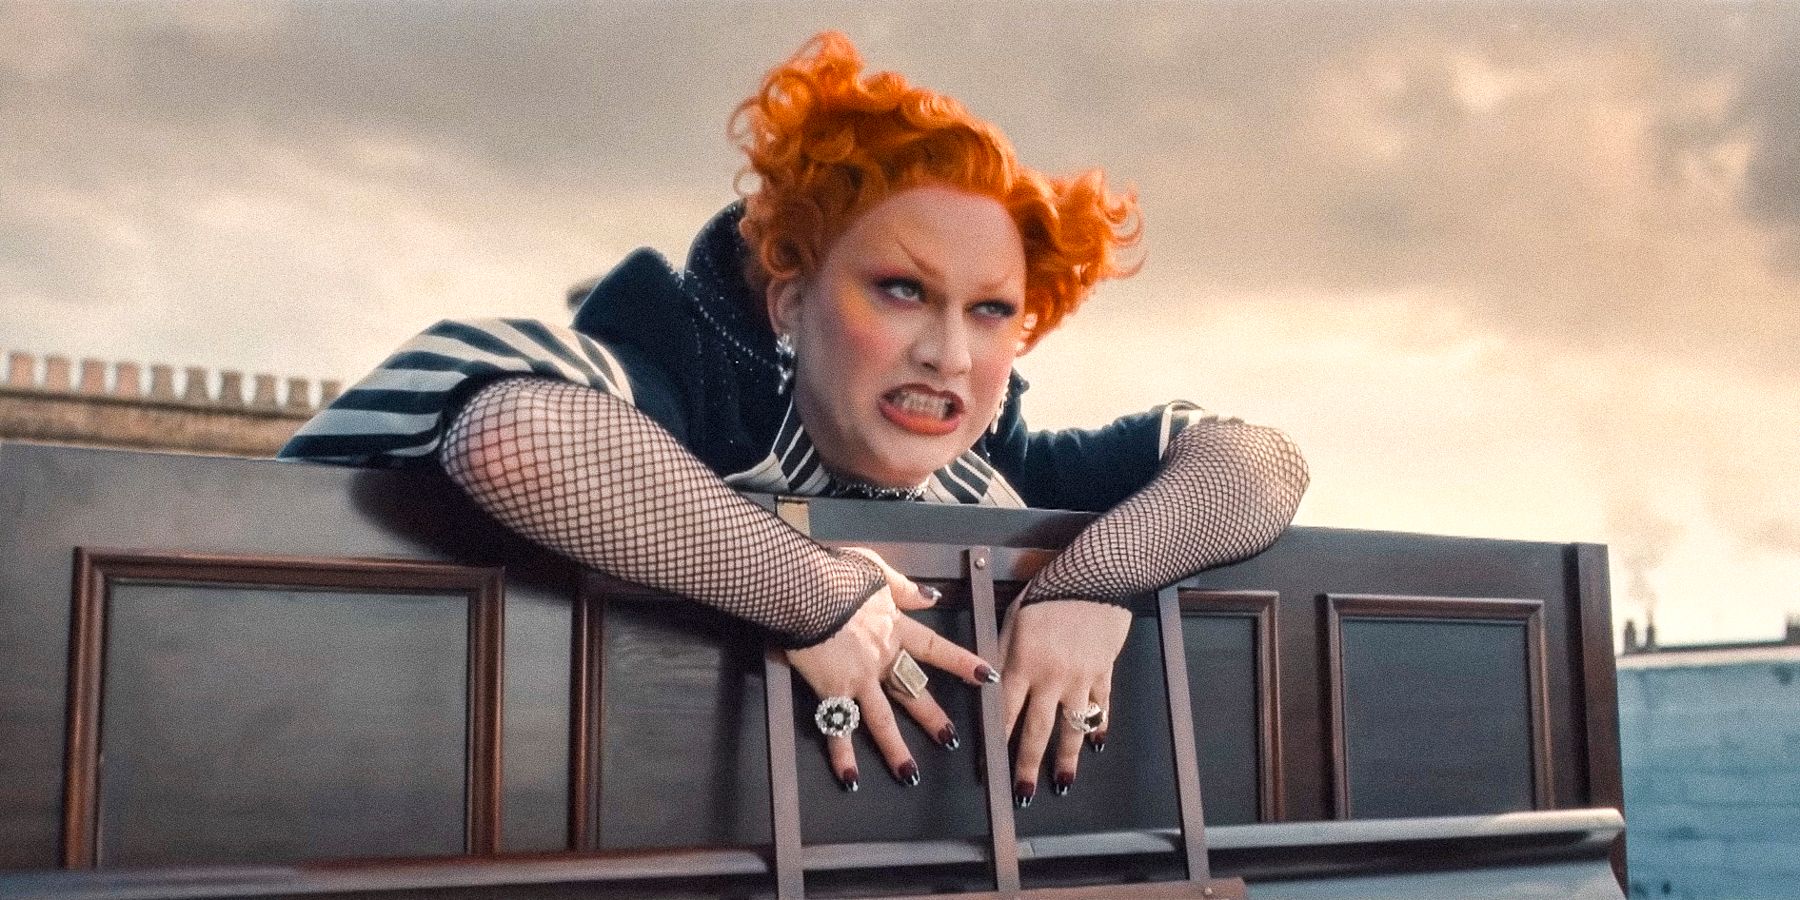  Jinkx Monsoon as Maestro emerging from a piano in Doctor Who season 14.